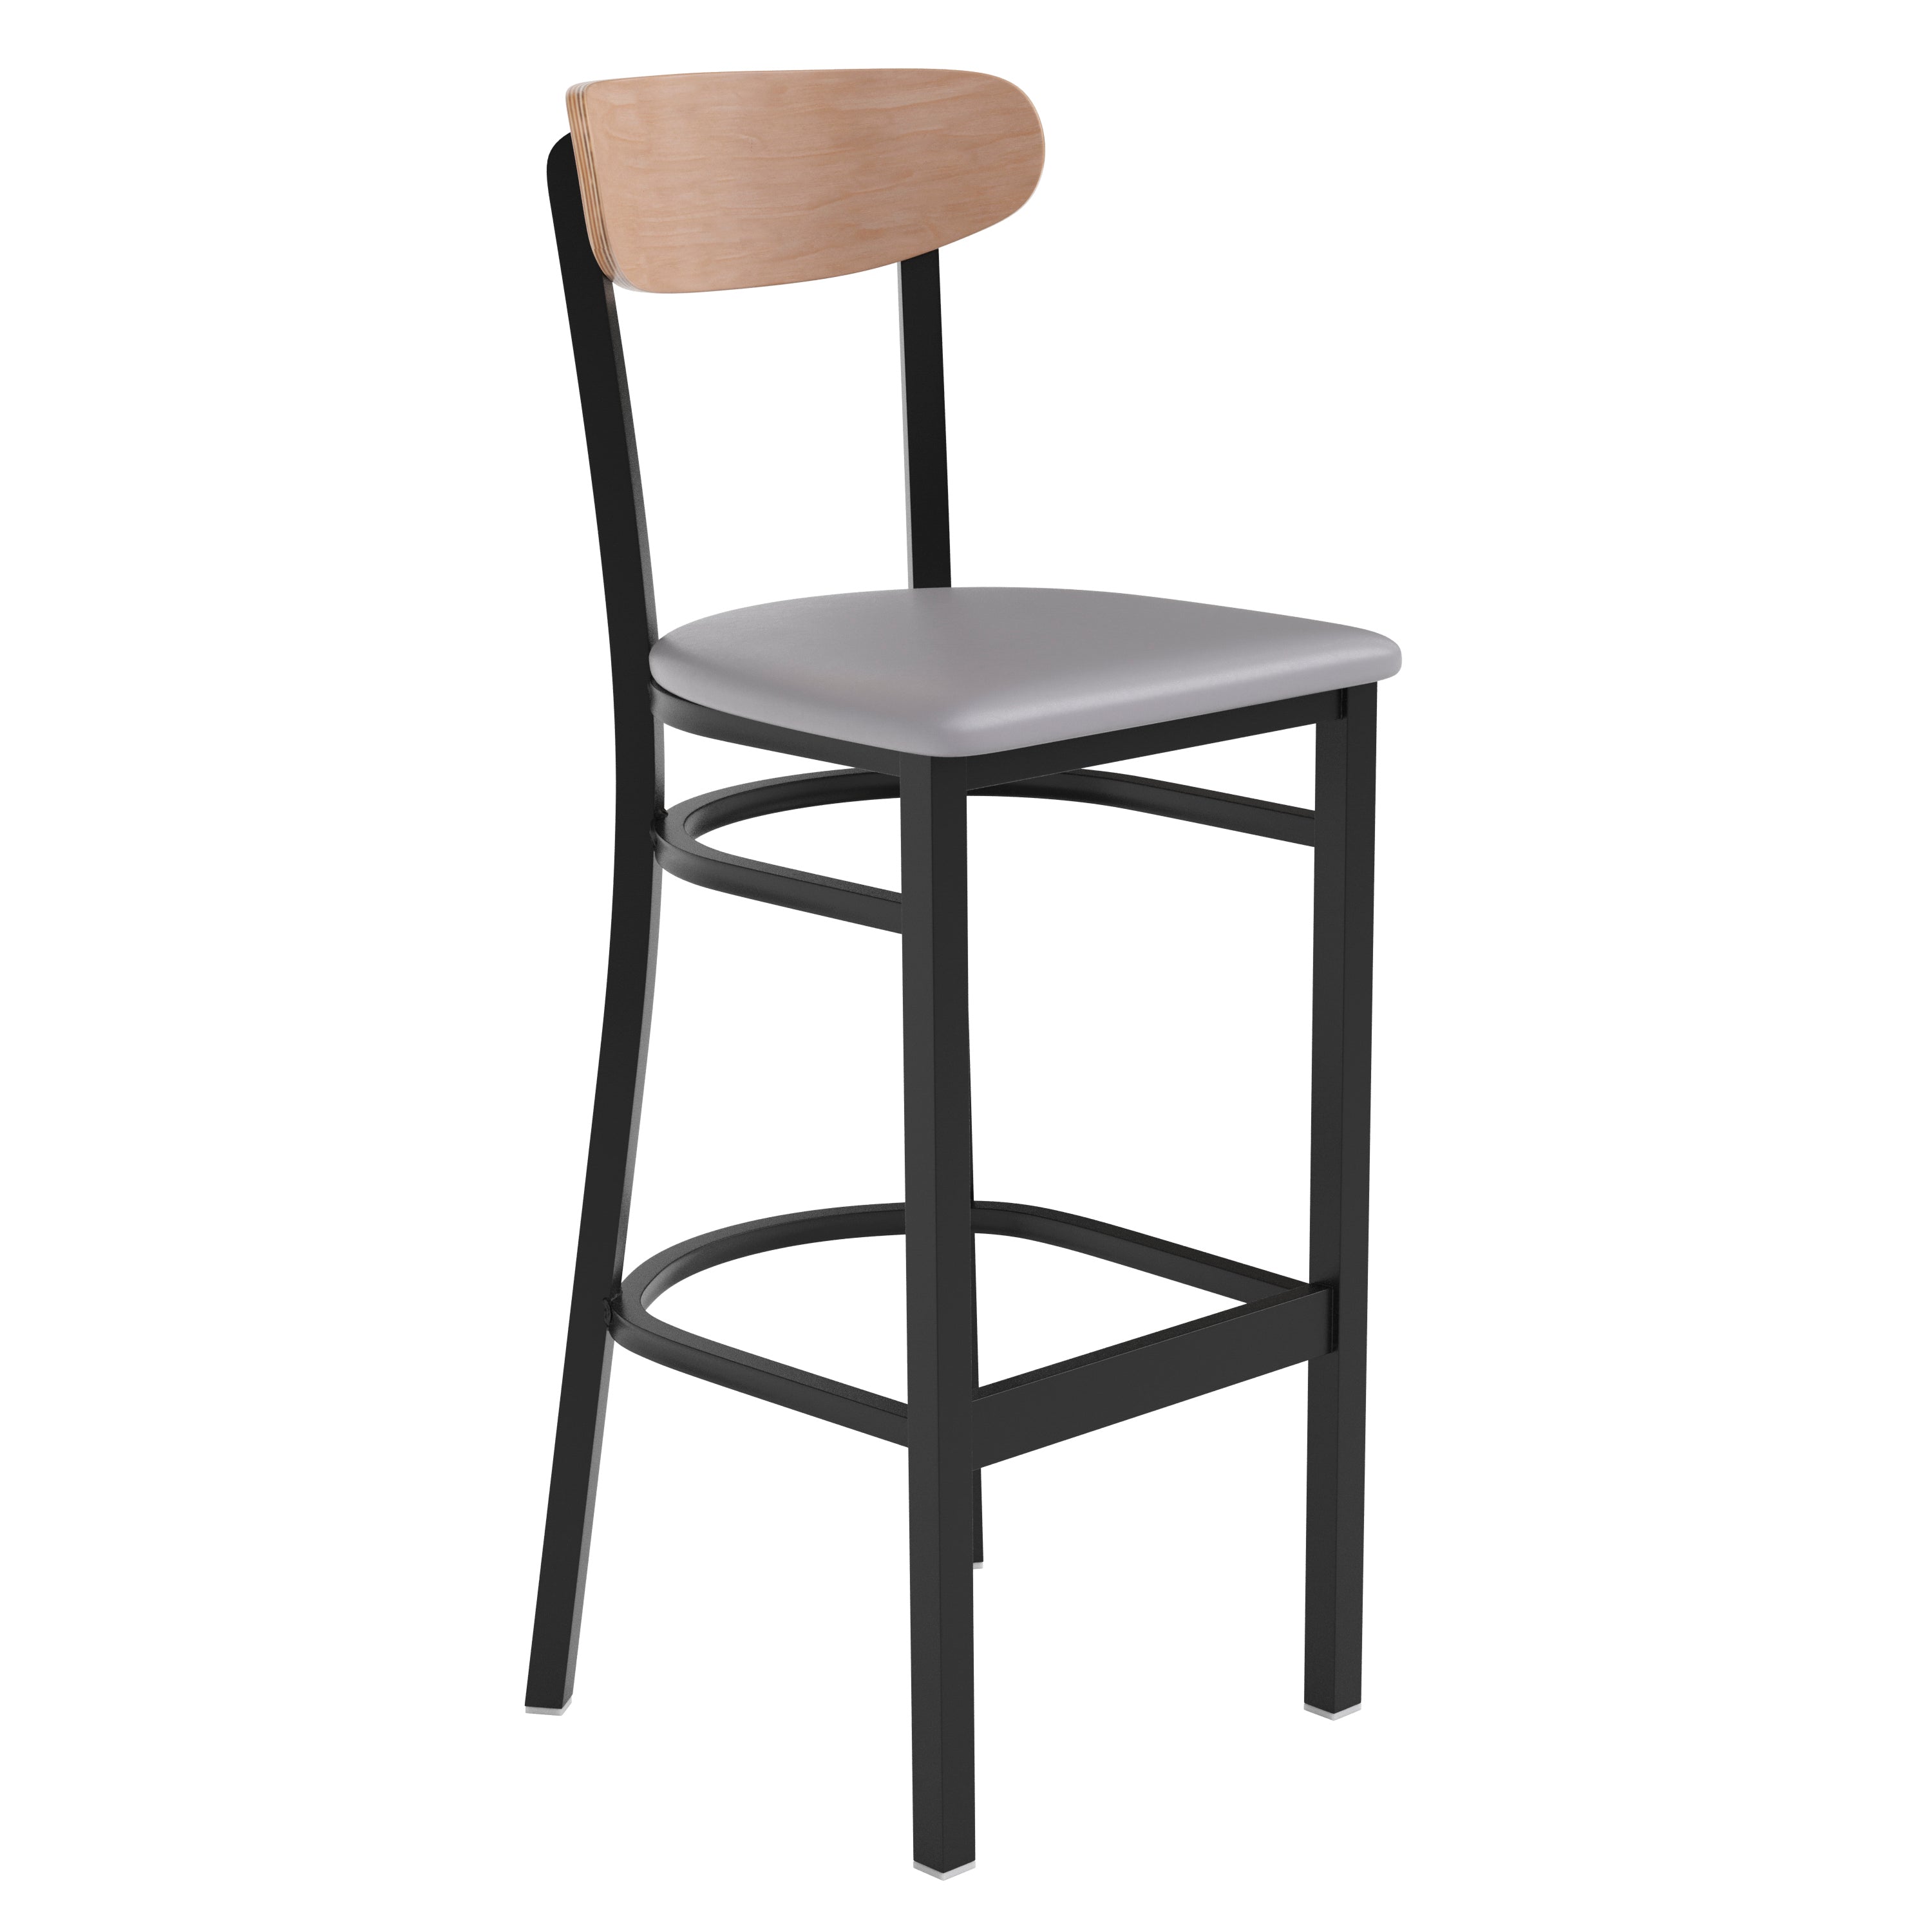 Wright Commercial Grade Barstool with 500 LB. Capacity Steel Frame, Solid Wood Seat, and Boomerang Back-Metal/ Restaurant Barstool-Flash Furniture-Wall2Wall Furnishings